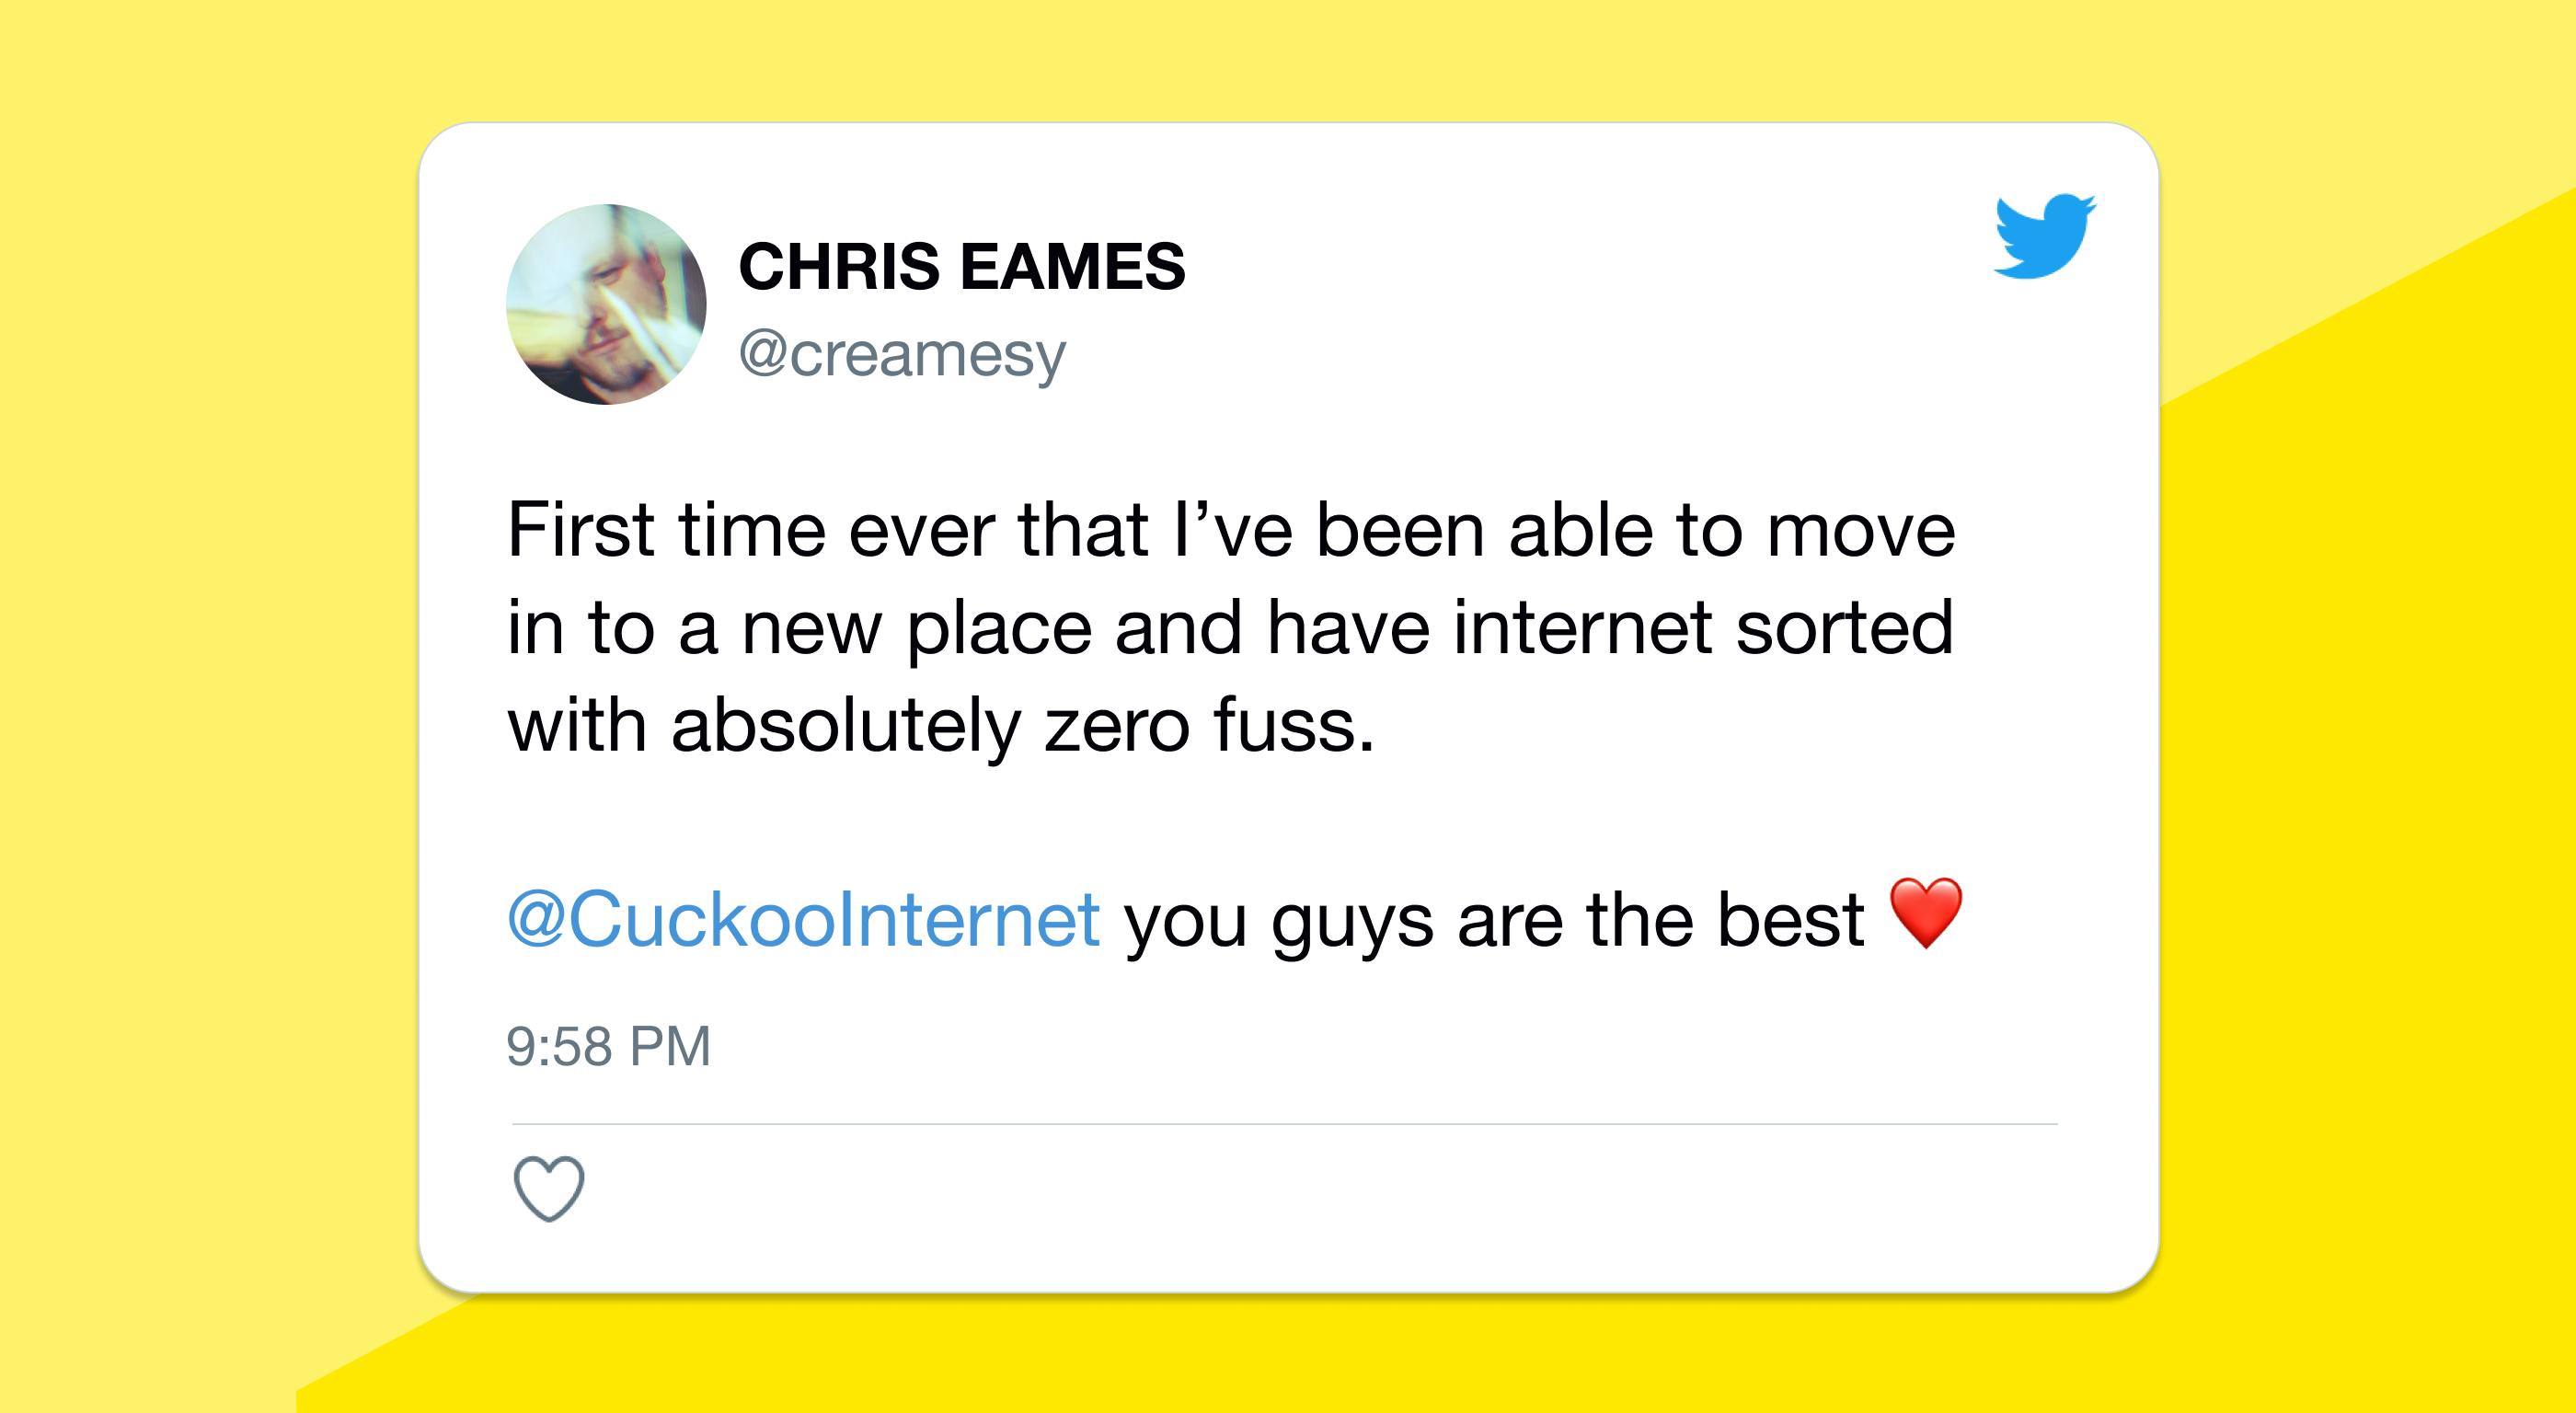 Tweet: "First time ever that I've been able to move in to a new place and internet sorted with absolutely zero fuss. @CuckooInternet you guys are the best"